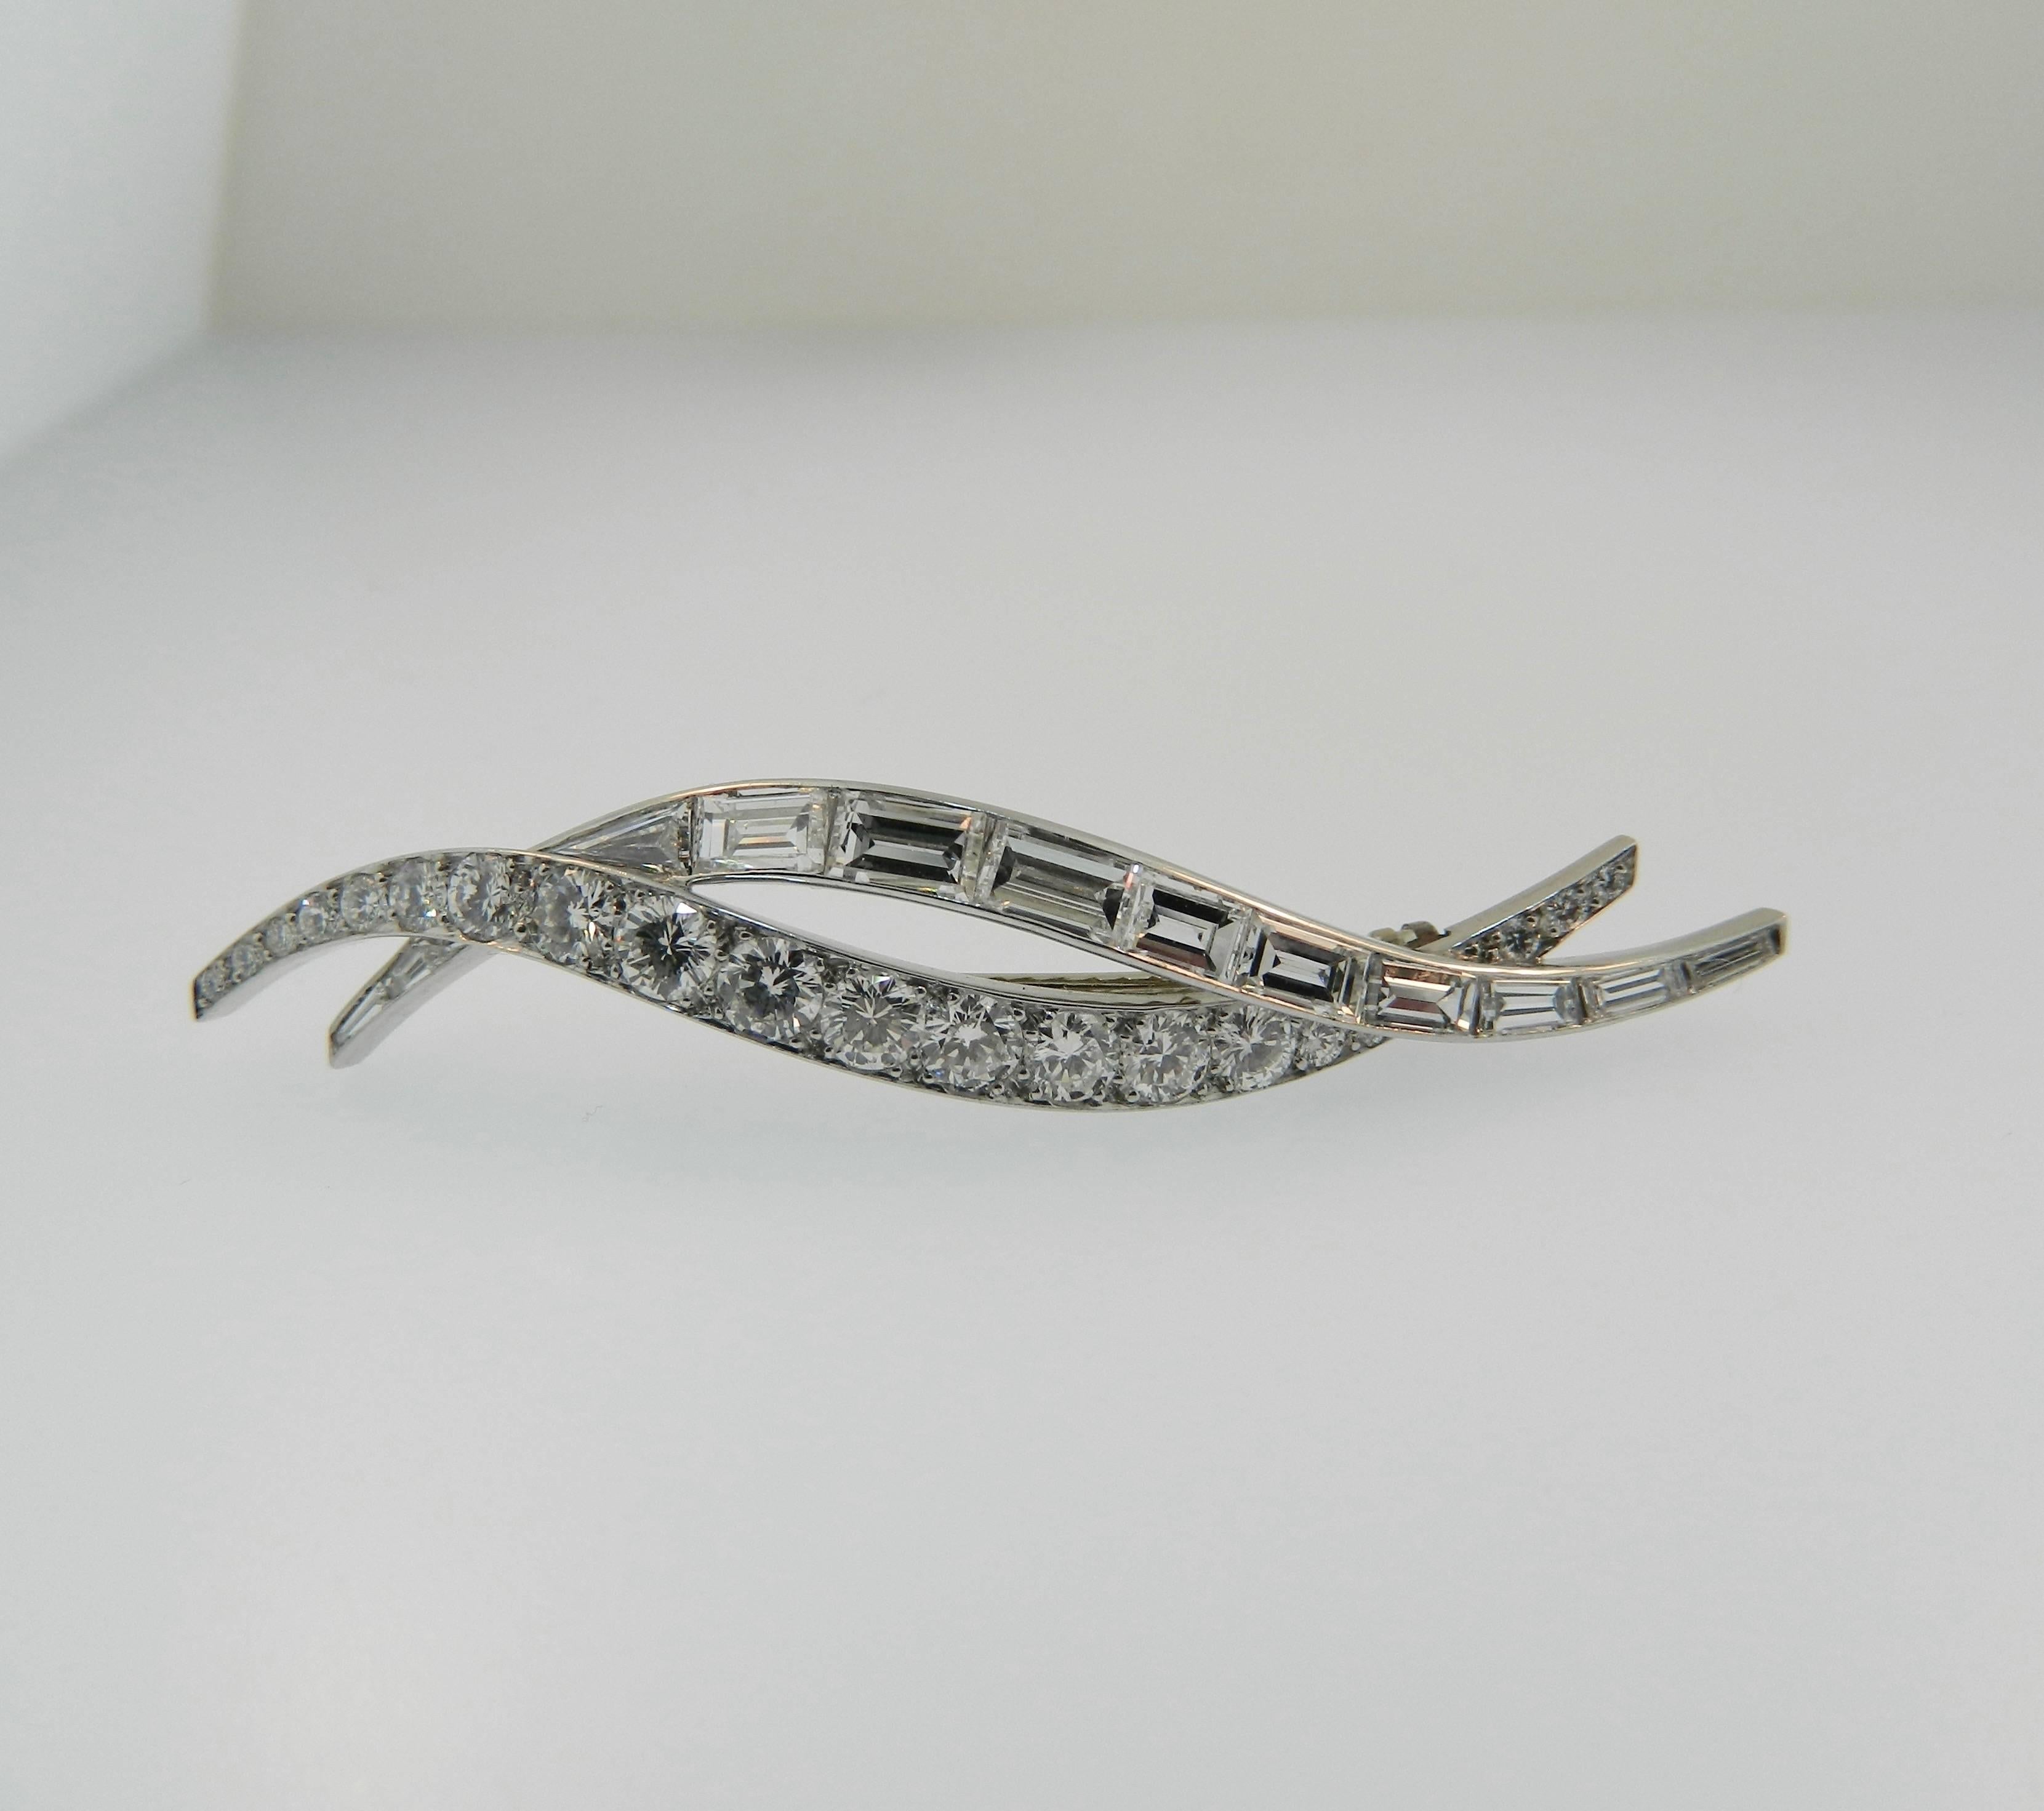 Van Cleef & Arpels Diamond Platinum Double Flamme Brooch In Excellent Condition For Sale In Chicago, IL